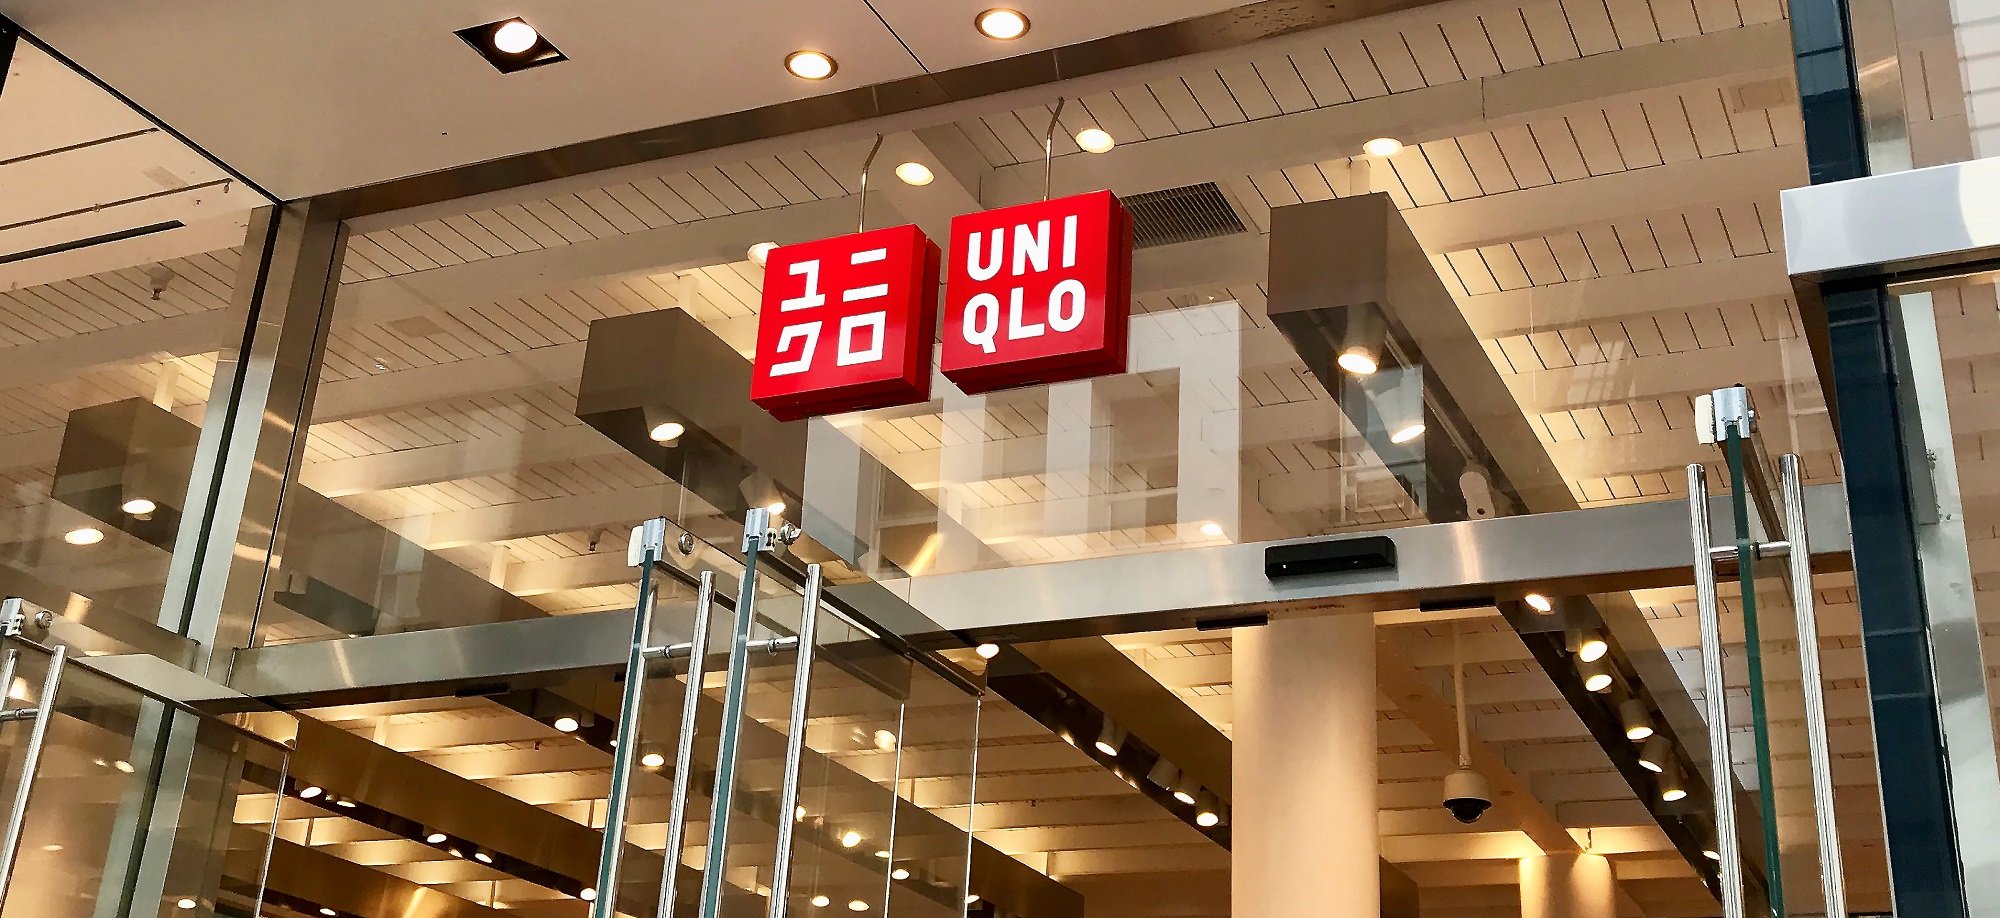 UNIQLO USA  Store No 47 in the States is now open for business   Welcome to the UniqloUSA family Westfield Santa Anita Where should we  open next Tell us in the